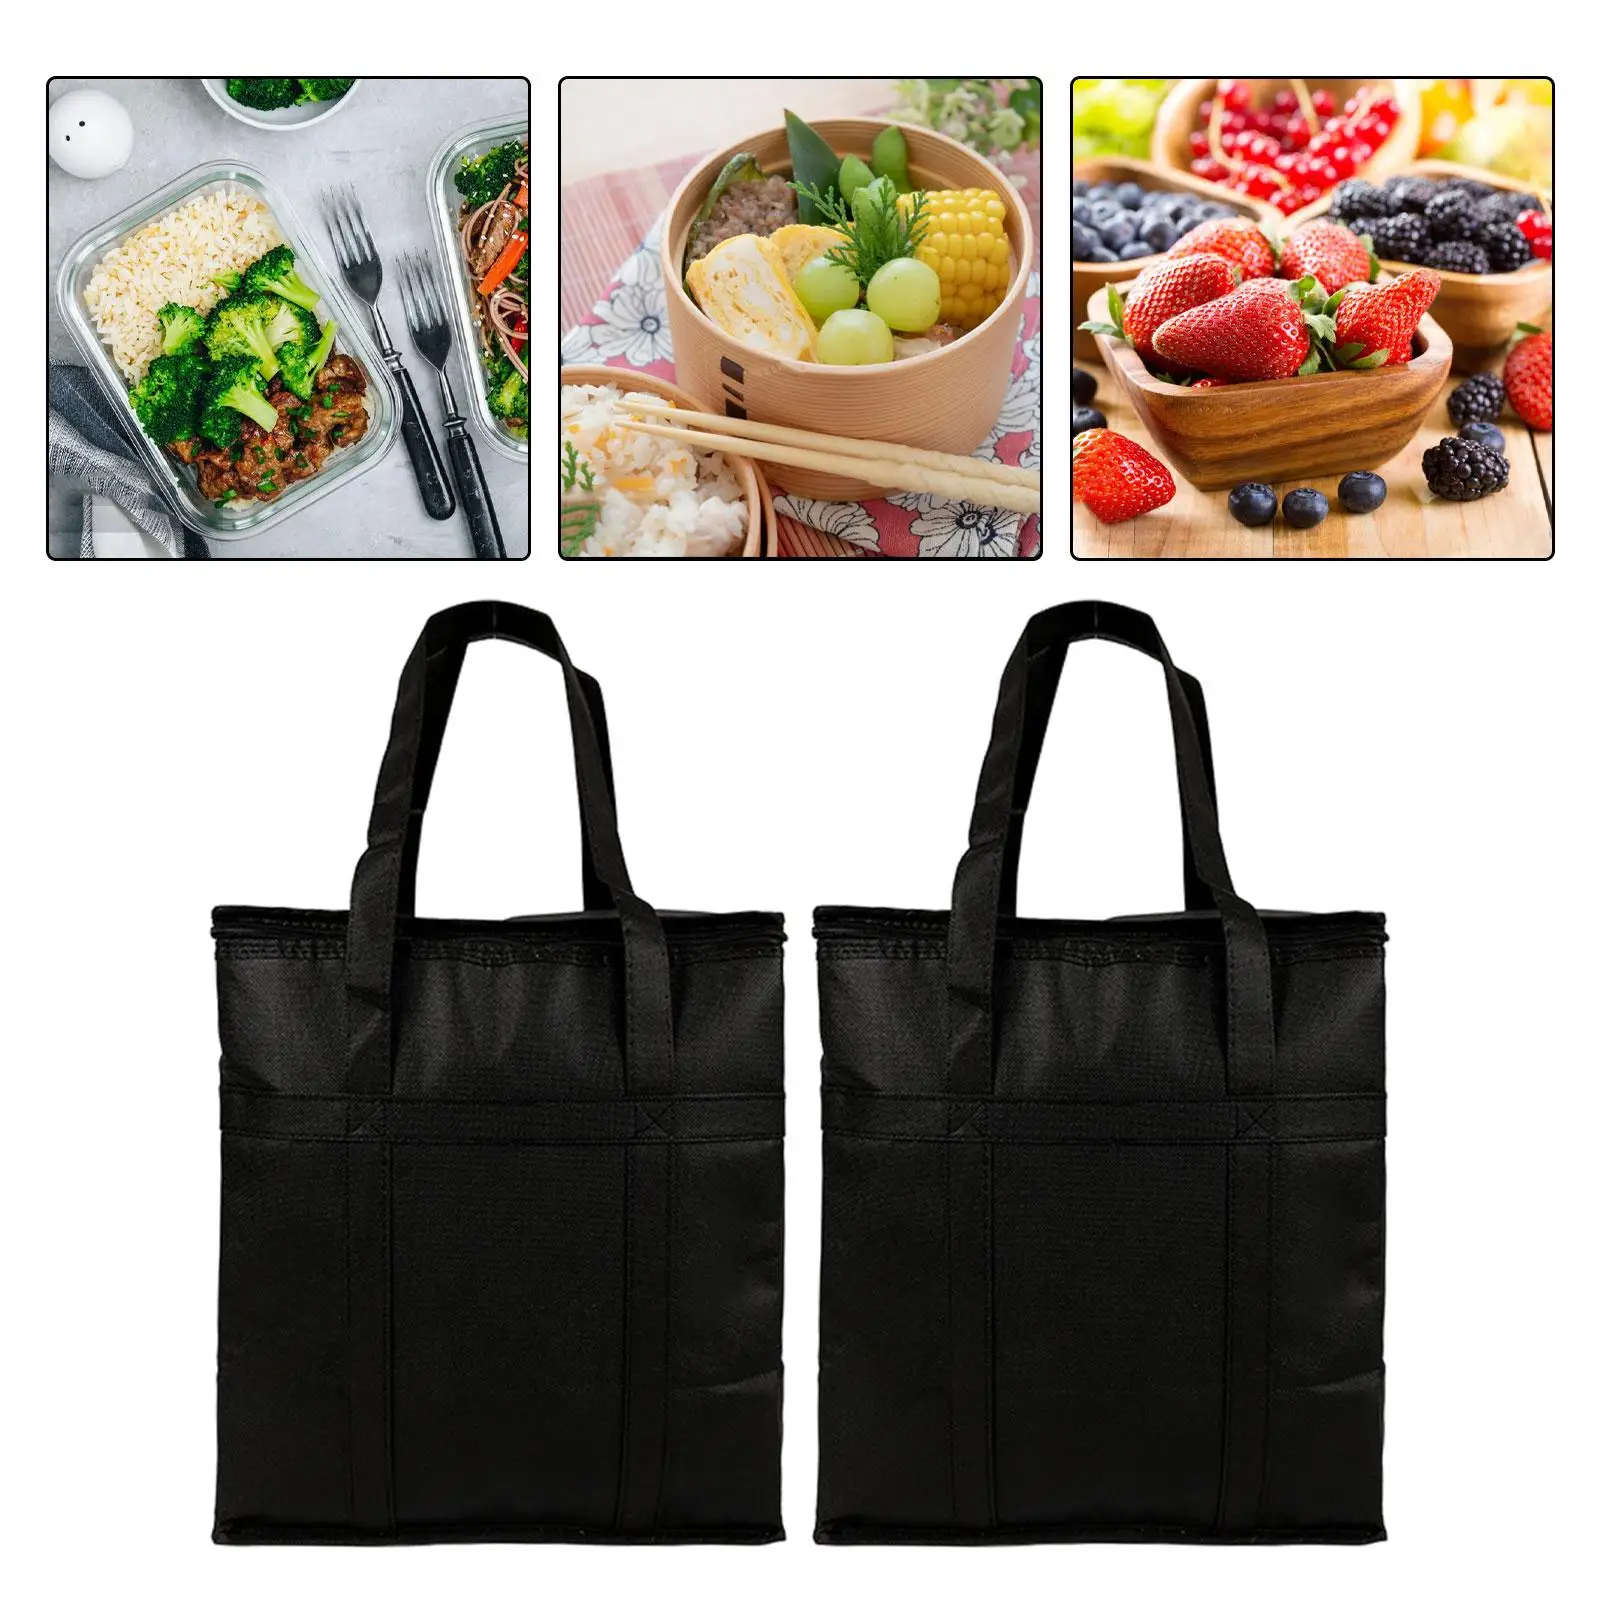 Insulated Take Away Bags with Zippered Top Cooling Bag Shopping Bag Reusable Bags for Outdoor Restaurant Camping Coffee